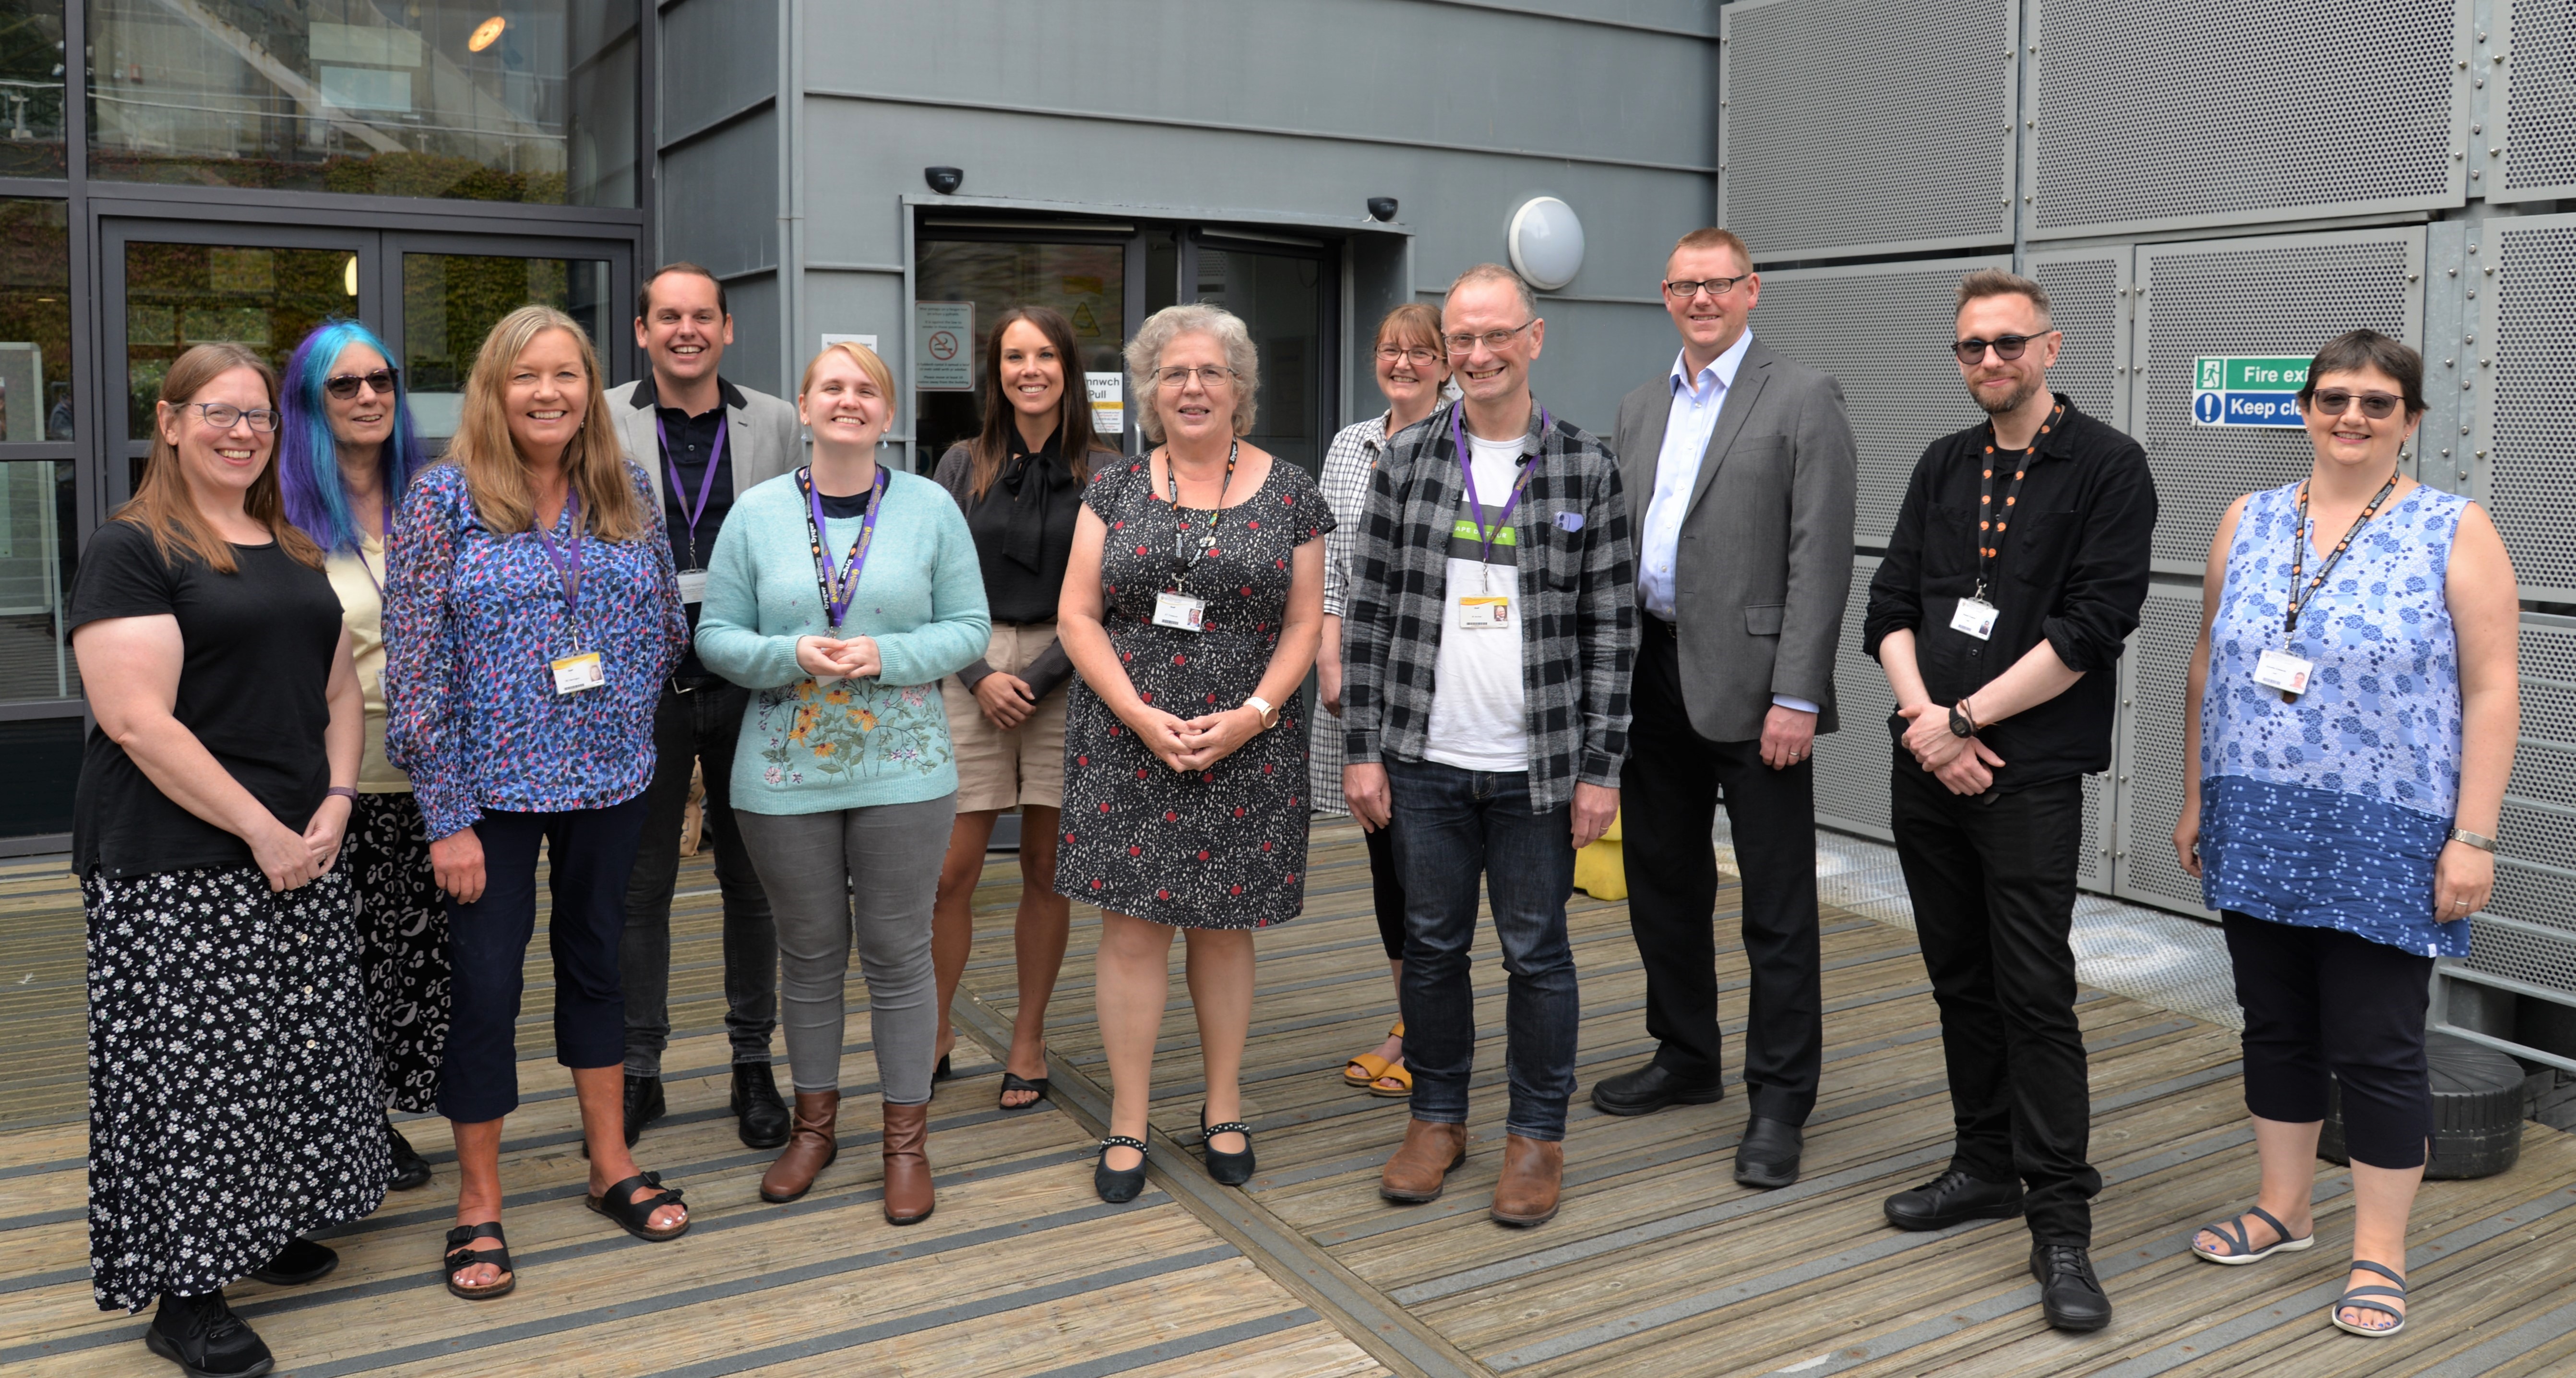 Aberystwyth University Vice-Chancellor Professor Elizabeth Treasure (centre) with organisers and attendees at the Aberystwyth University Learning & Teaching Conference 2022